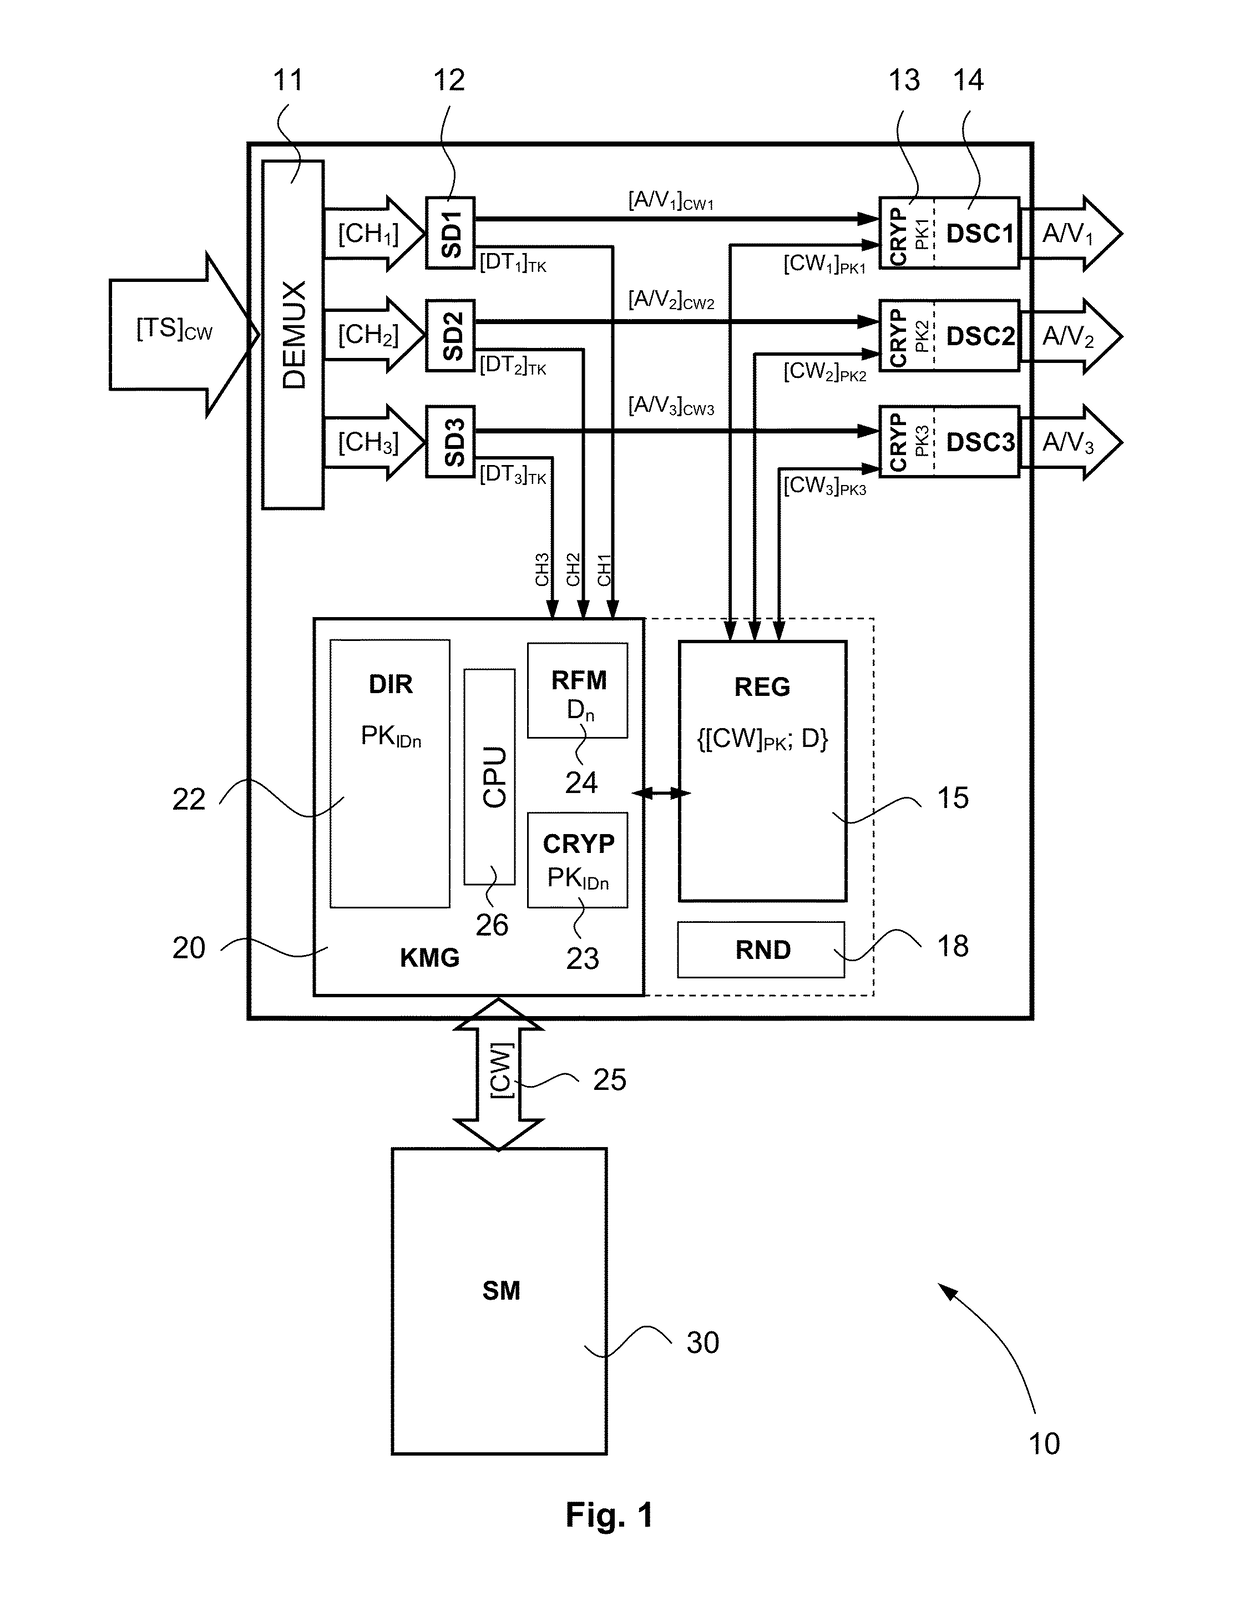 Method for protecting decryption keys in a decoder and decoder for implementing said method